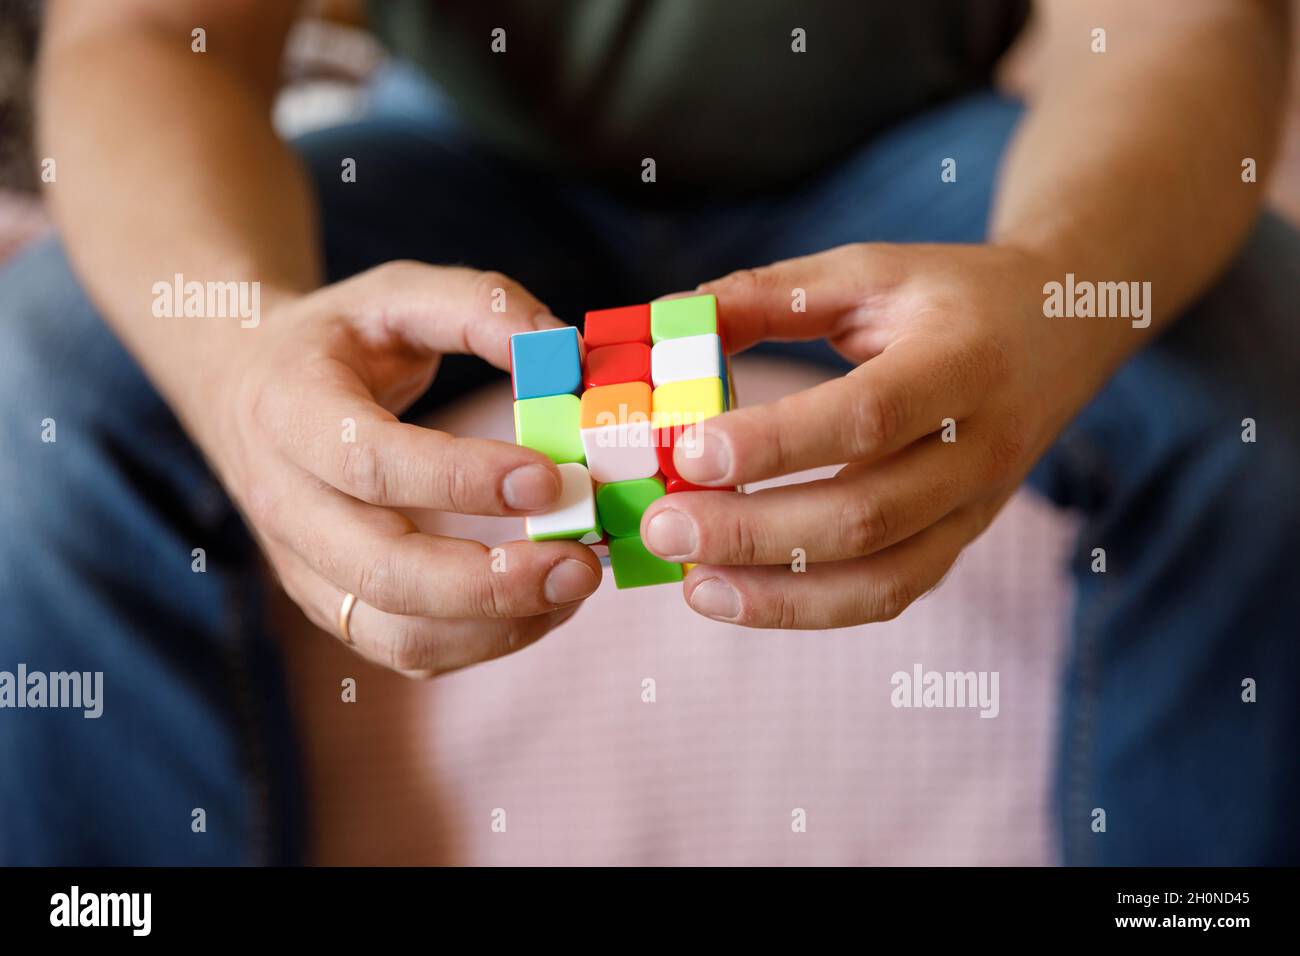 Moscow Russia October 10, 2021. Male hands holding Rubik's cube close up Rubik's cube invented by a Hungarian architect Erno Rubik in 1974. Stock Photo